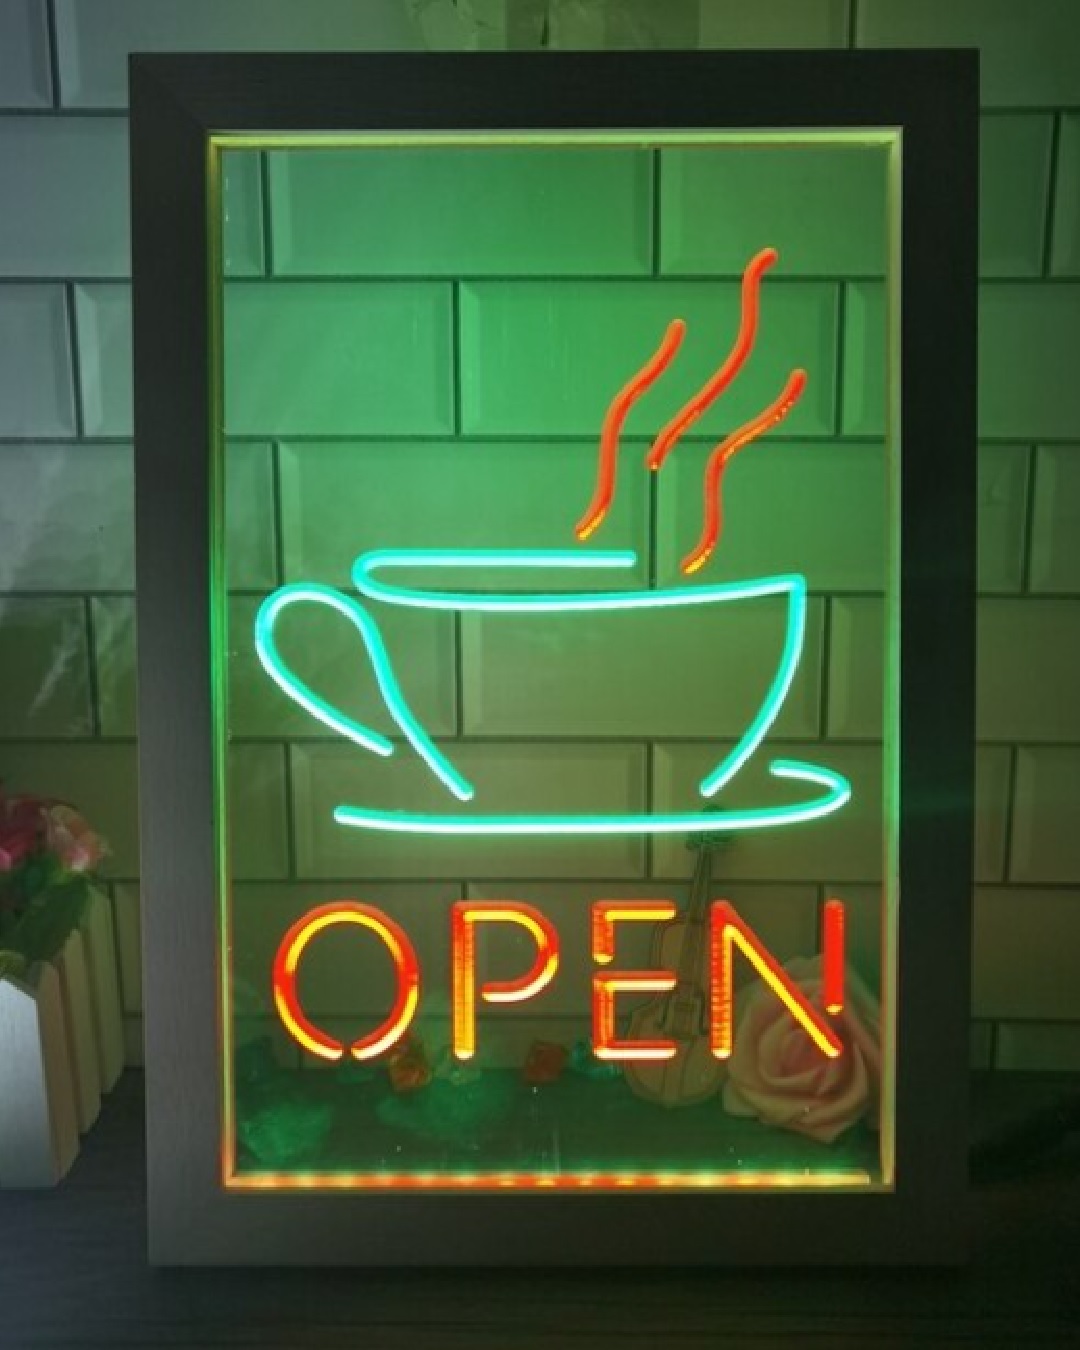 Open sign in green and orange